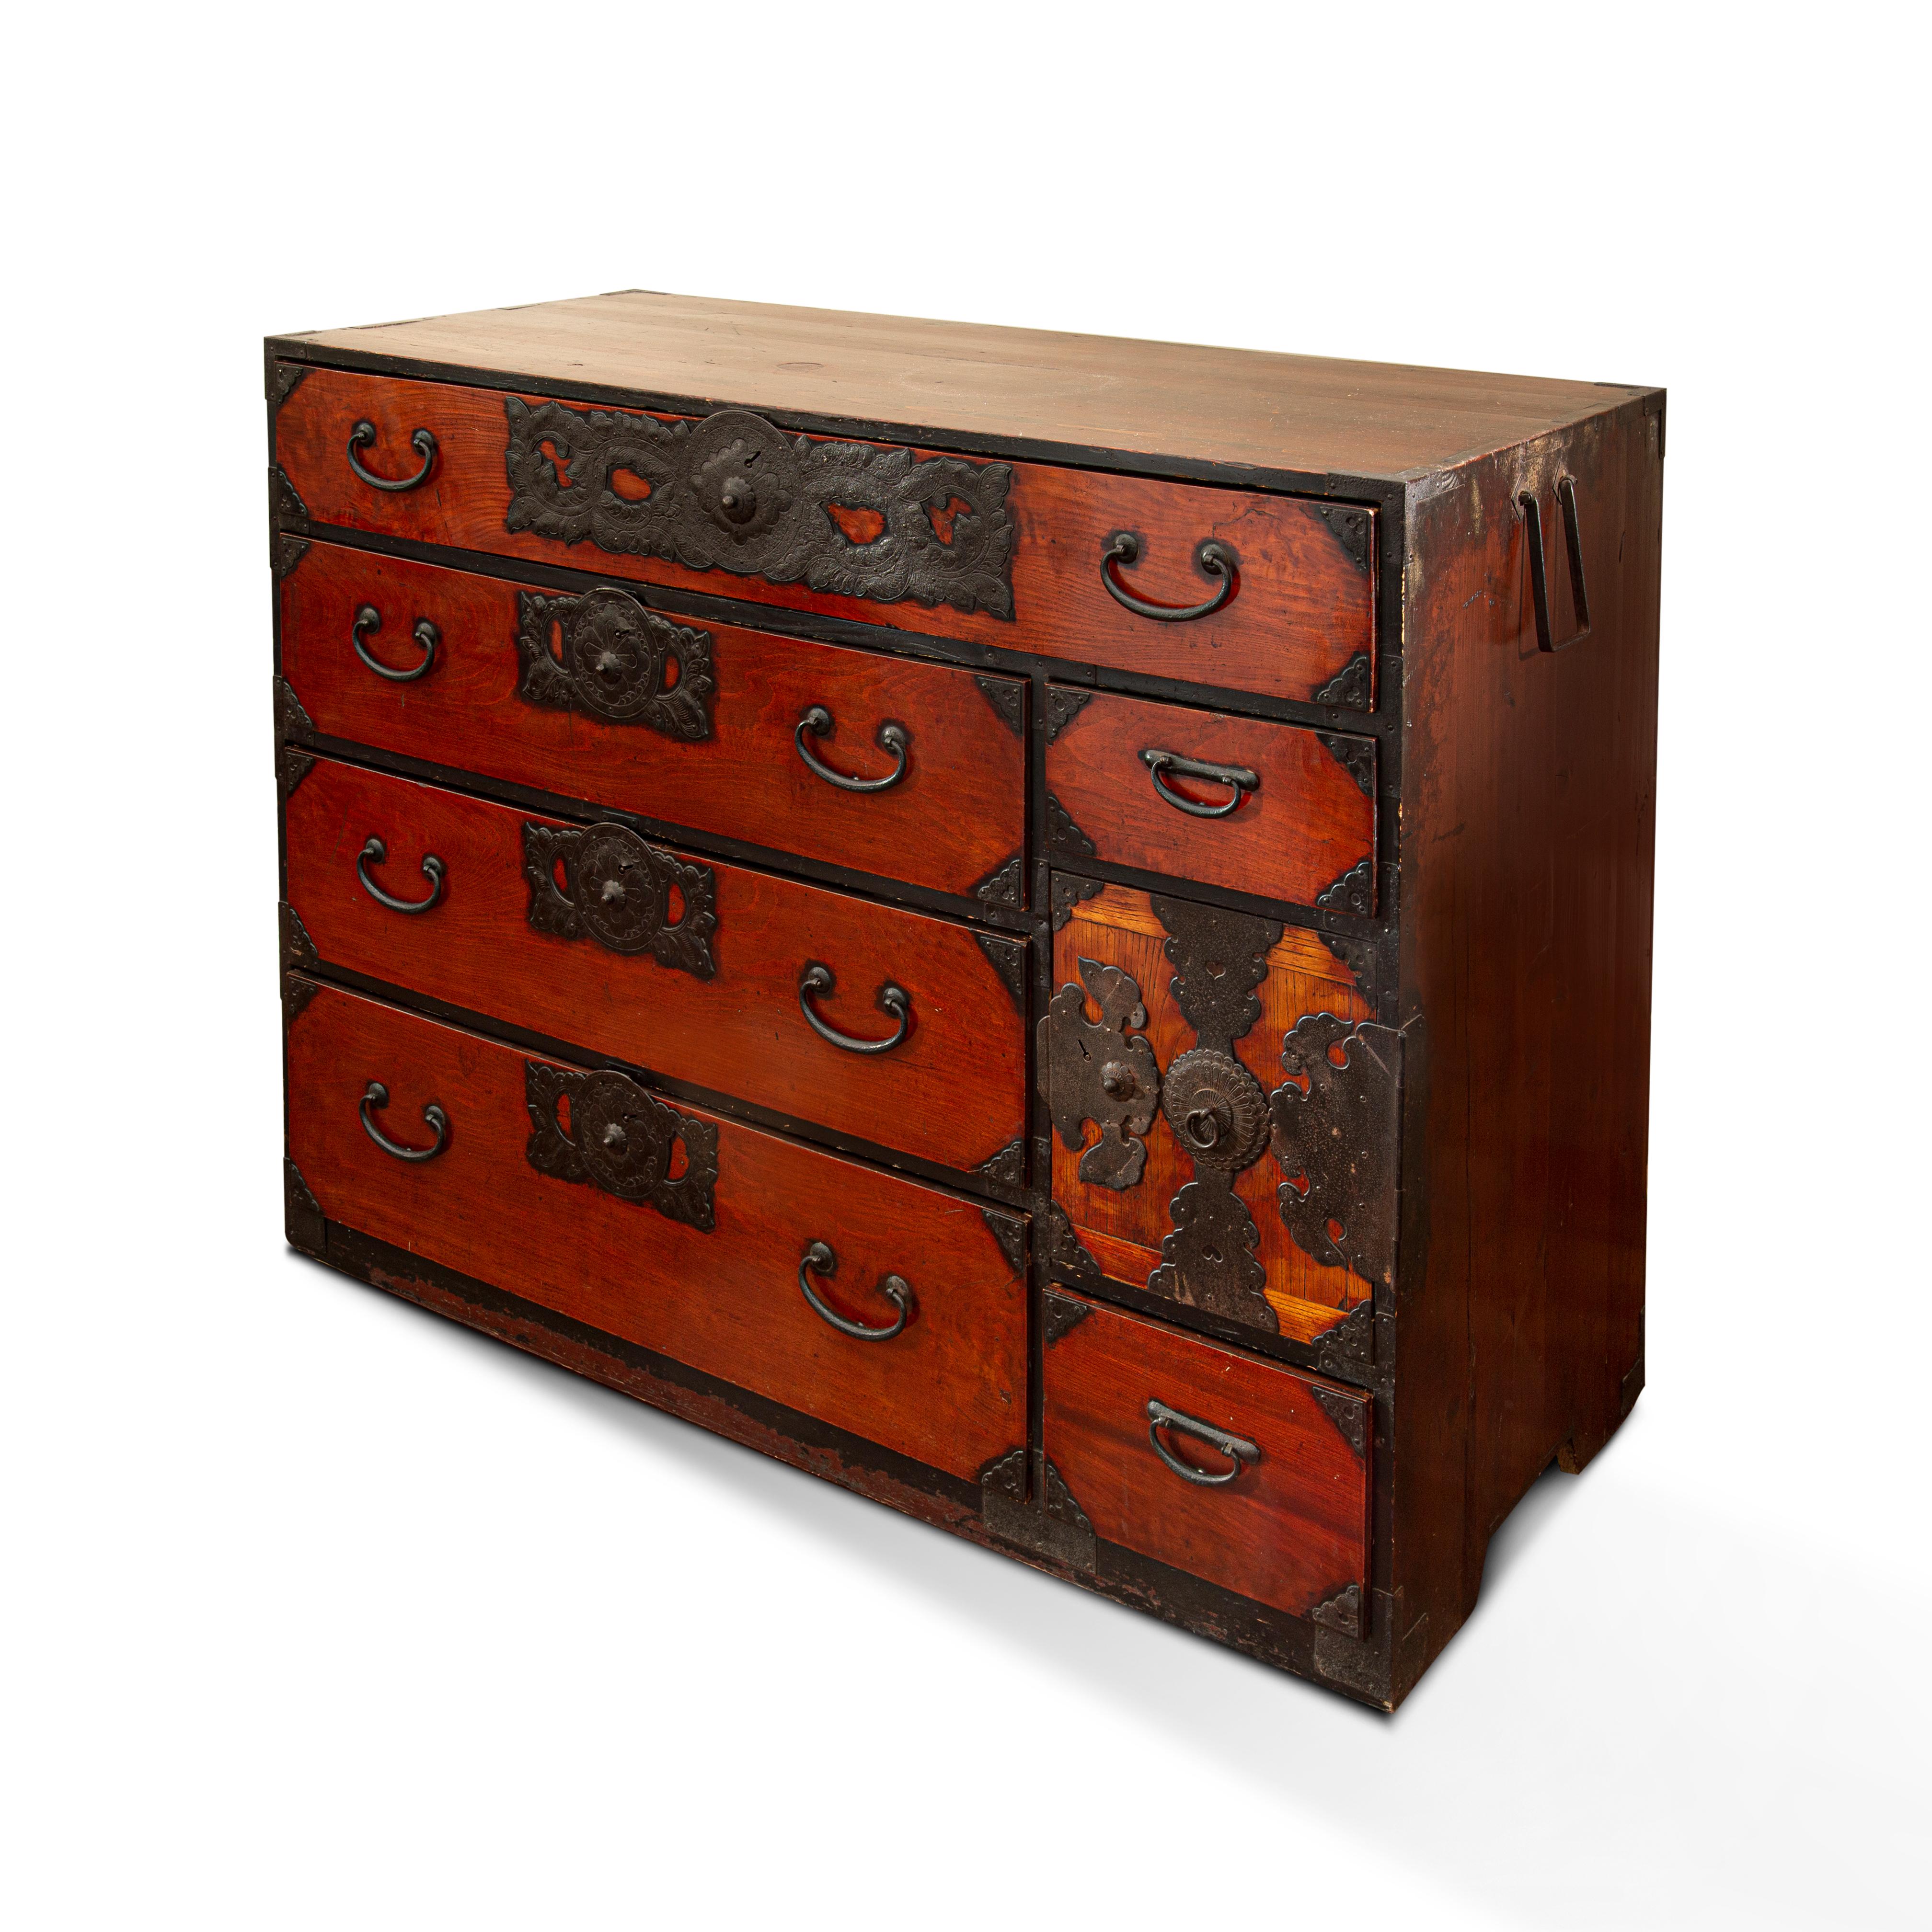 This 19th-century Japanese Tansu clothing chest produced in the Meiji period is made of Japanese cedar wood (cryptomeria Japonica) in its inner parts, while for the outer parts it is made of Keyaki wood, (Ulmacea), complemented by hand-cut iron